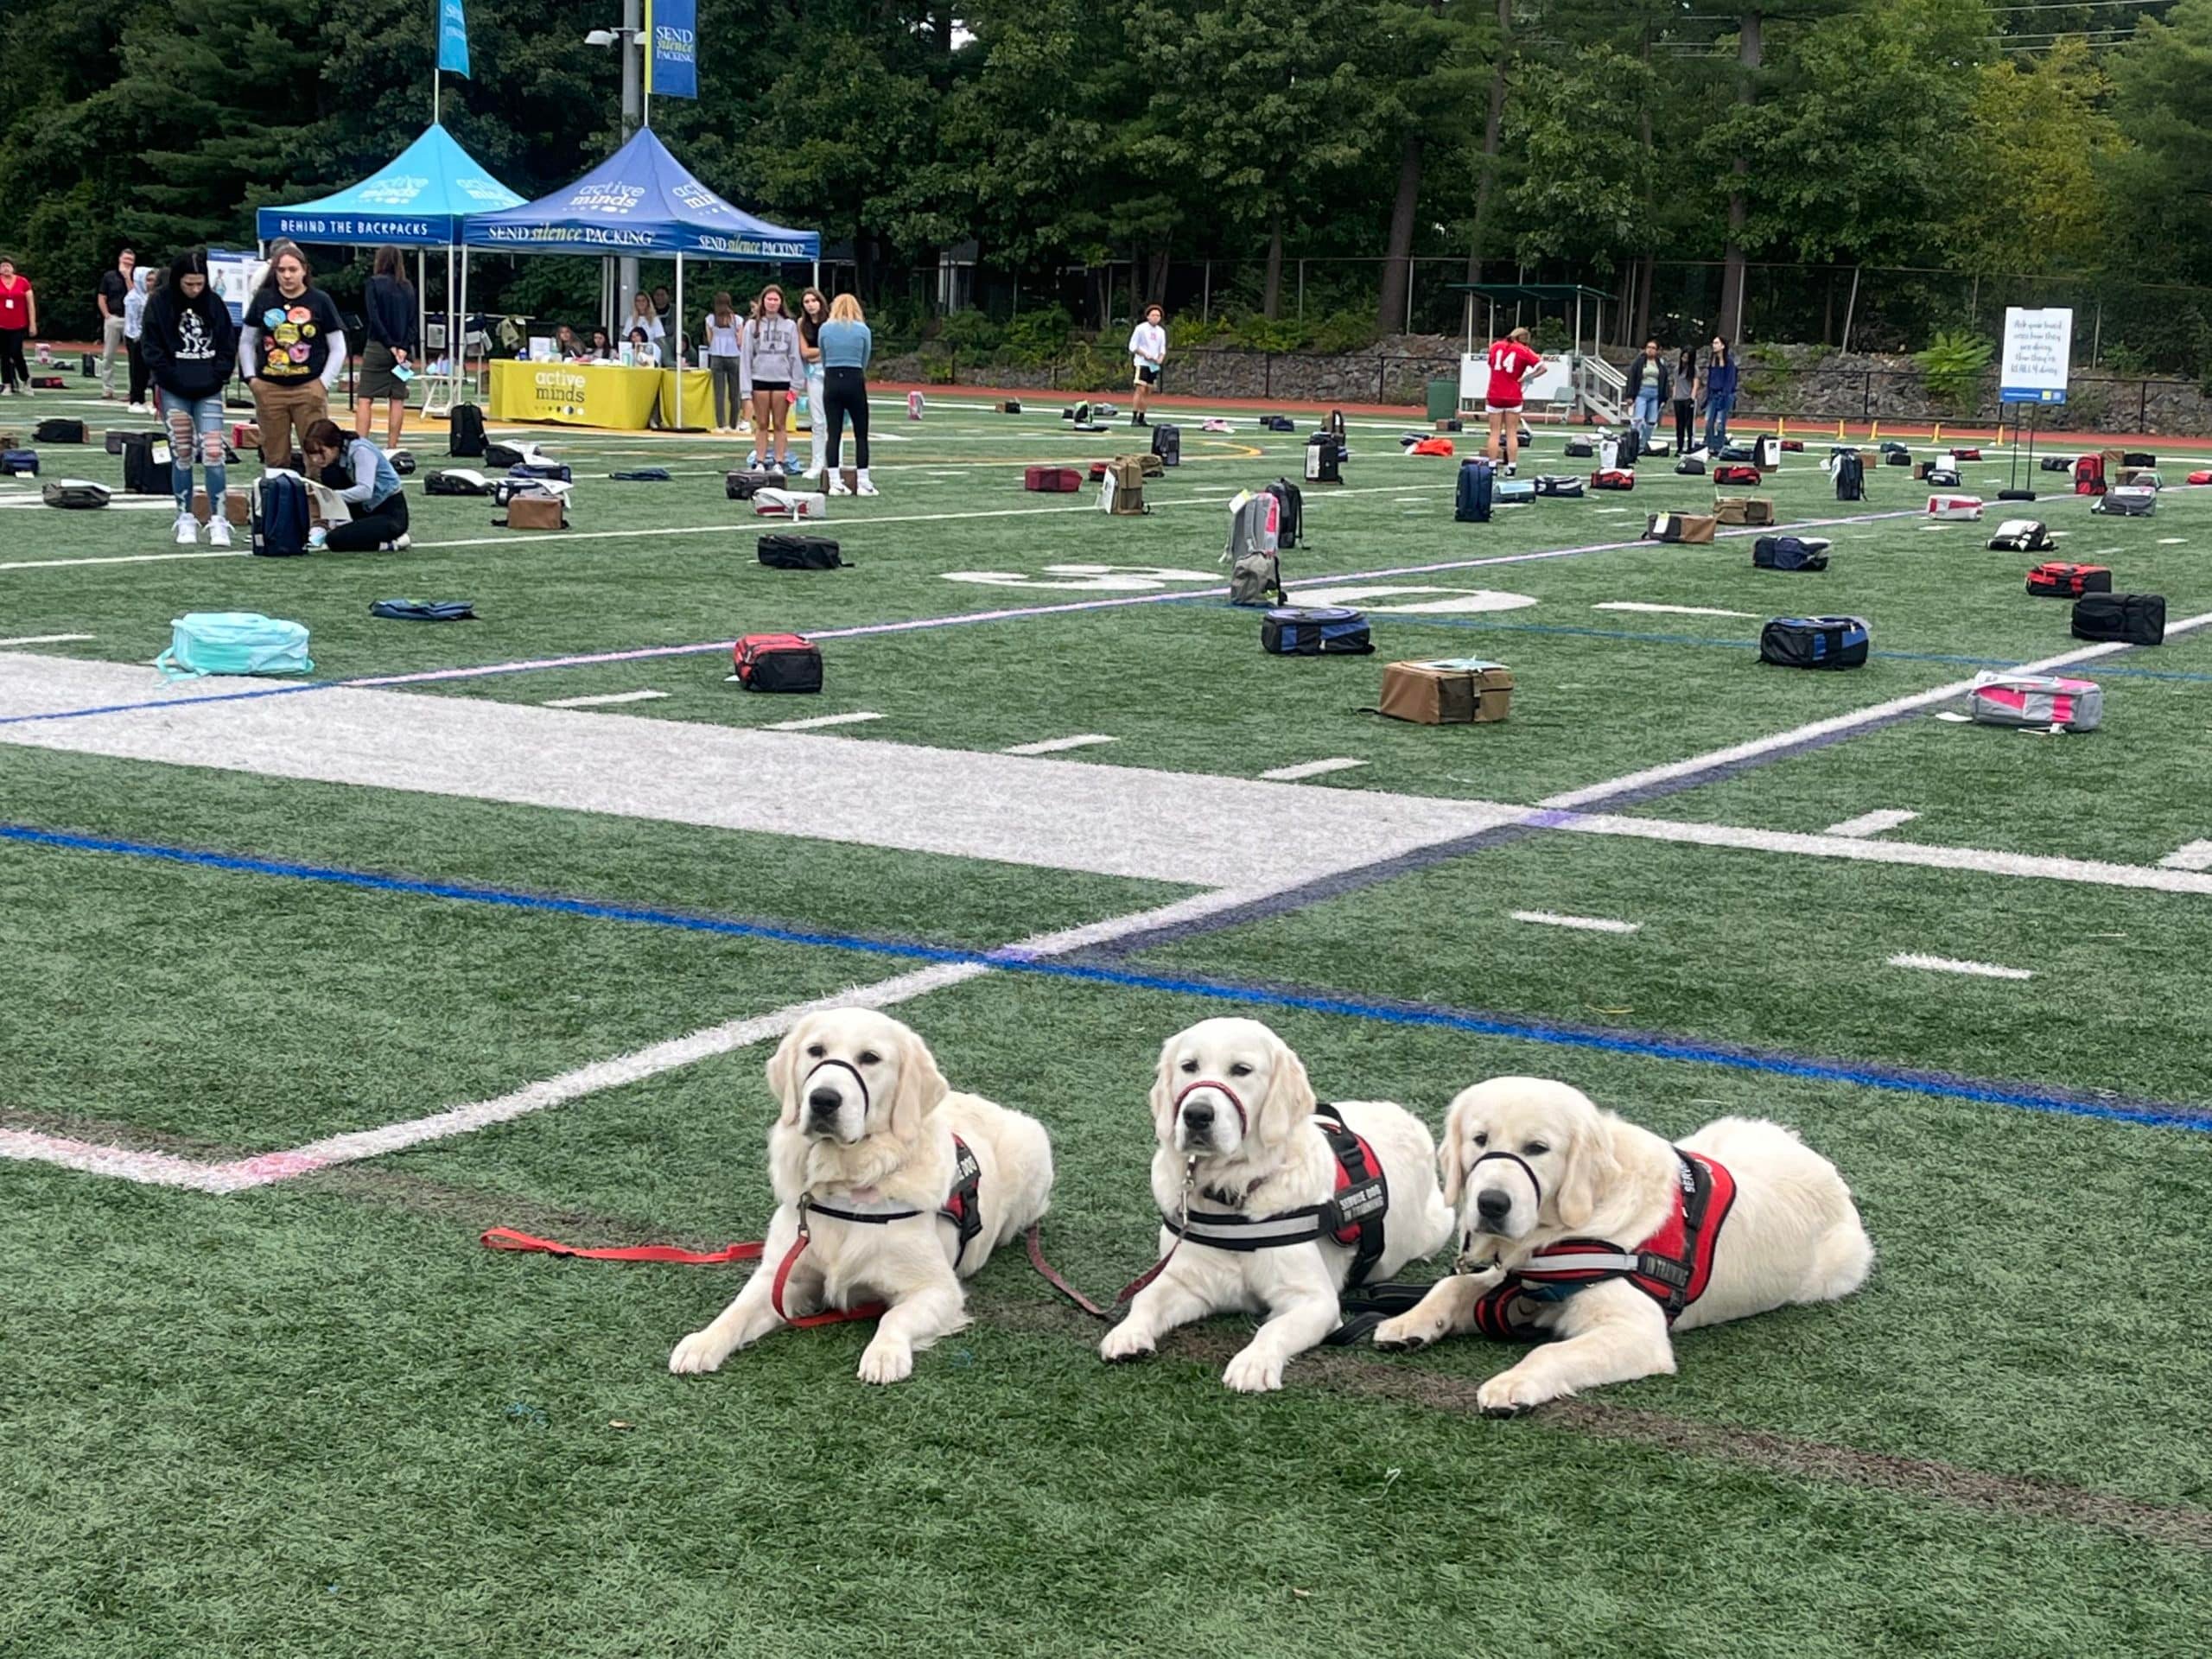 Service dogs from Golden Opportunities for Independence also visited the school to support students during the display. (Photo courtesy King Philip Regional School District)